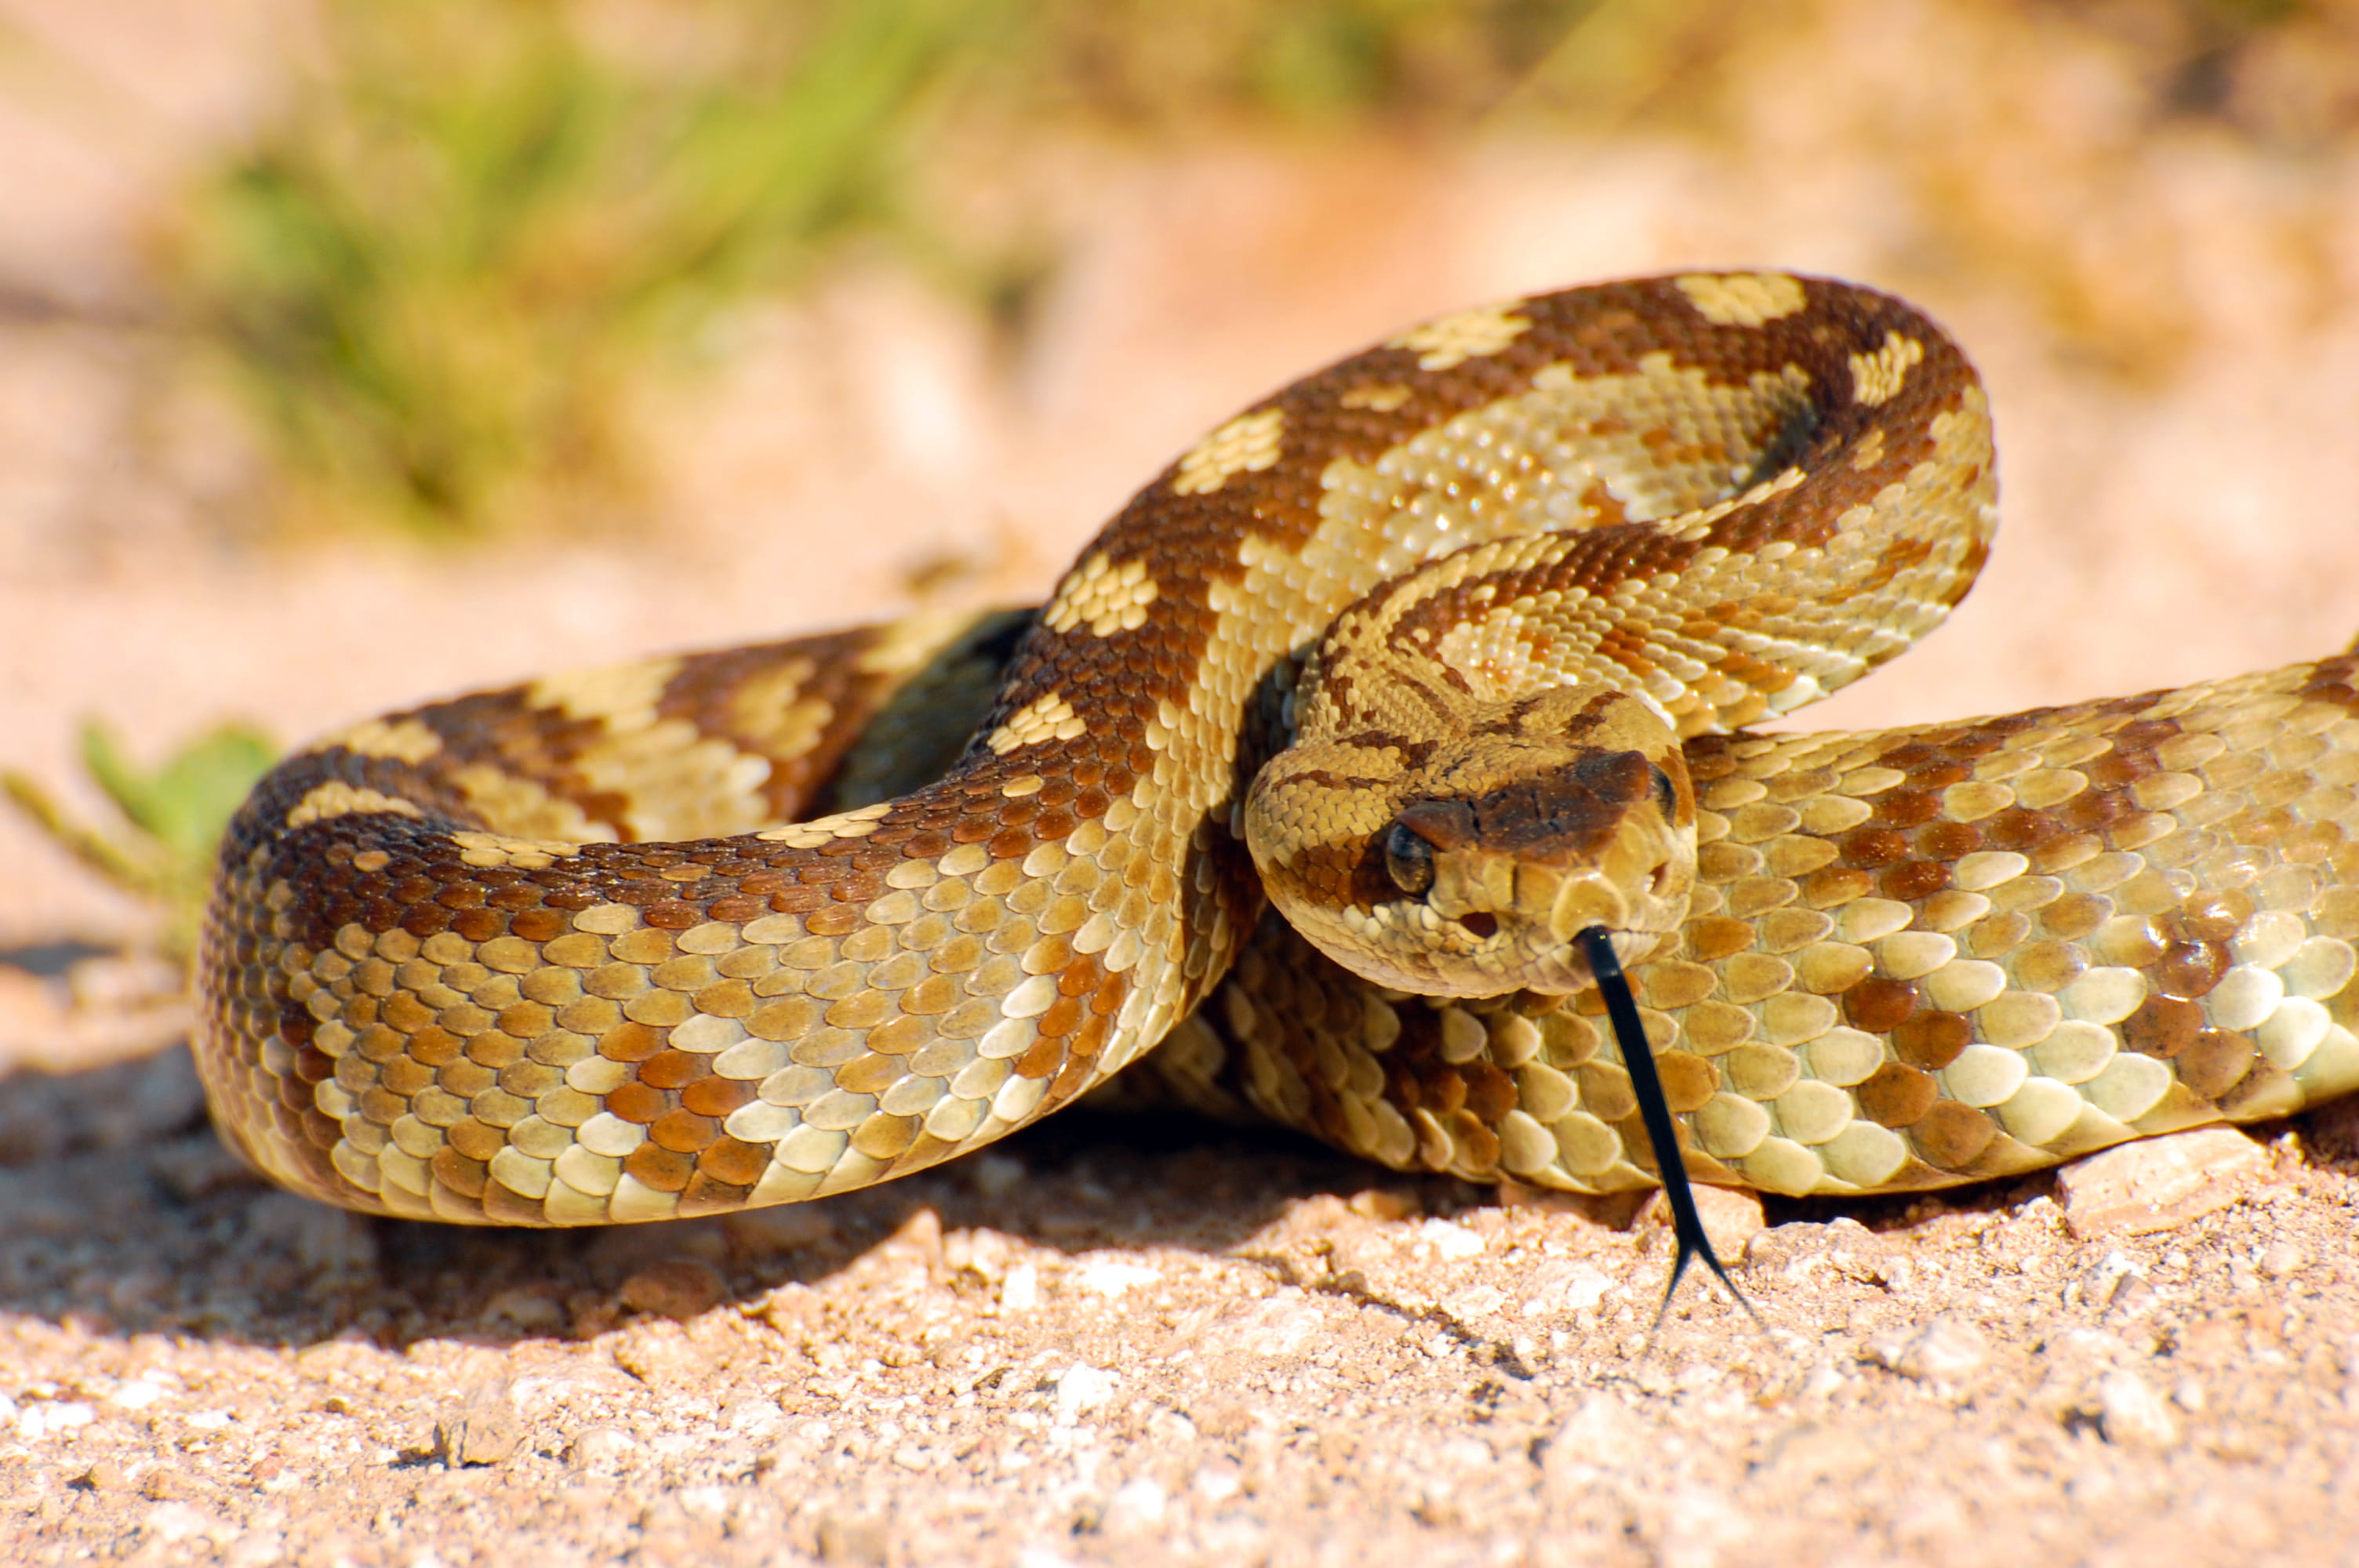 how long does it take to die from rattlesnake bite